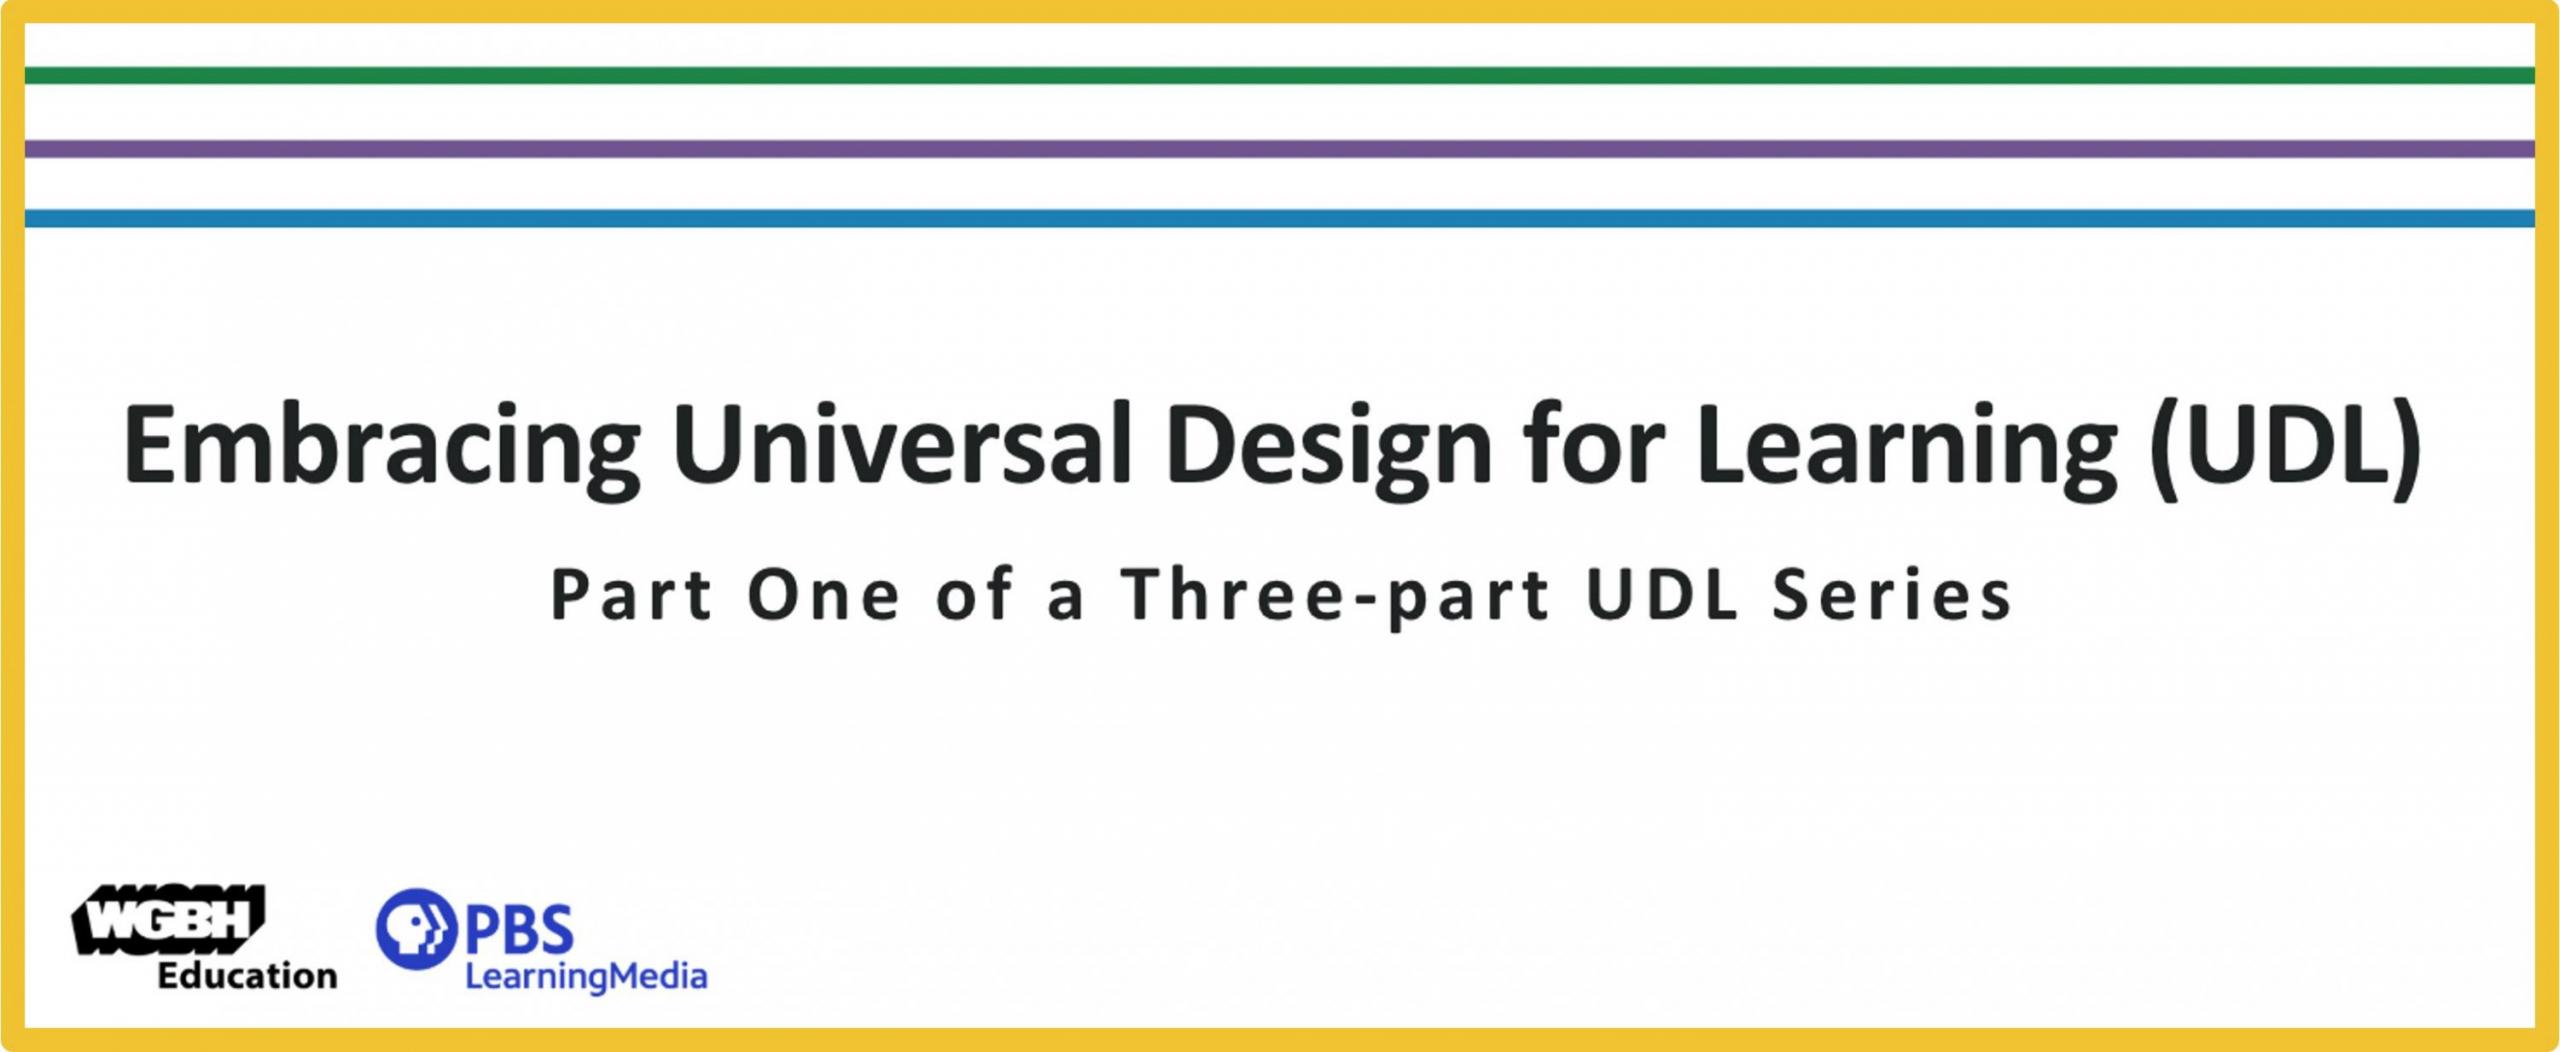 Slide titled "Embracing Universal Design for Learning: Part One of a Three-part UDL Series".